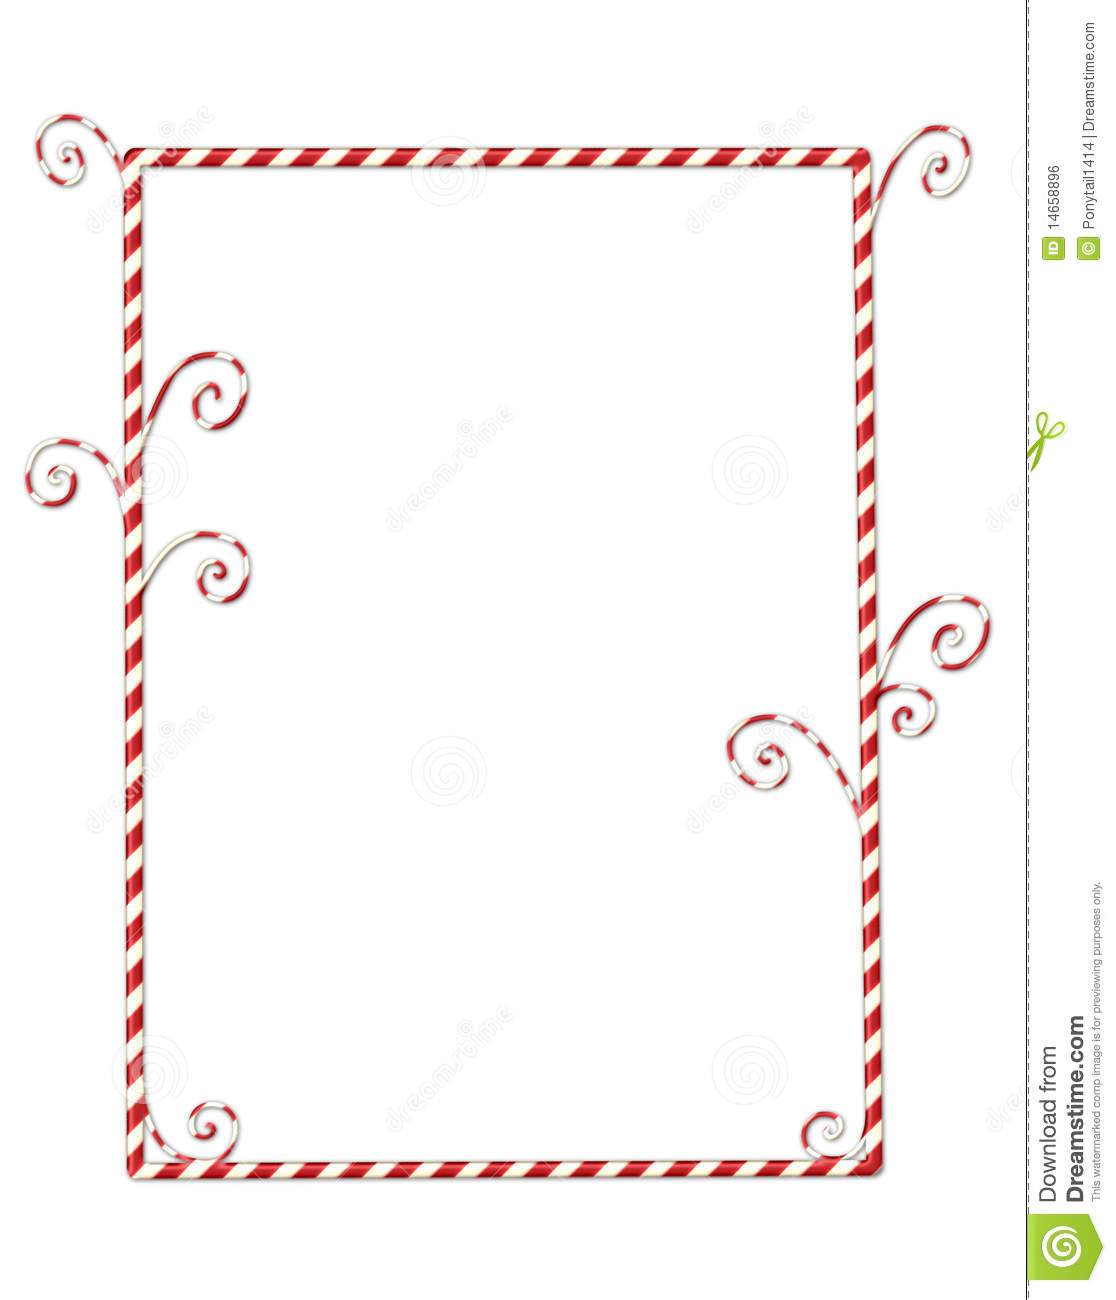 Candy Cane Border Clip Art Black and White